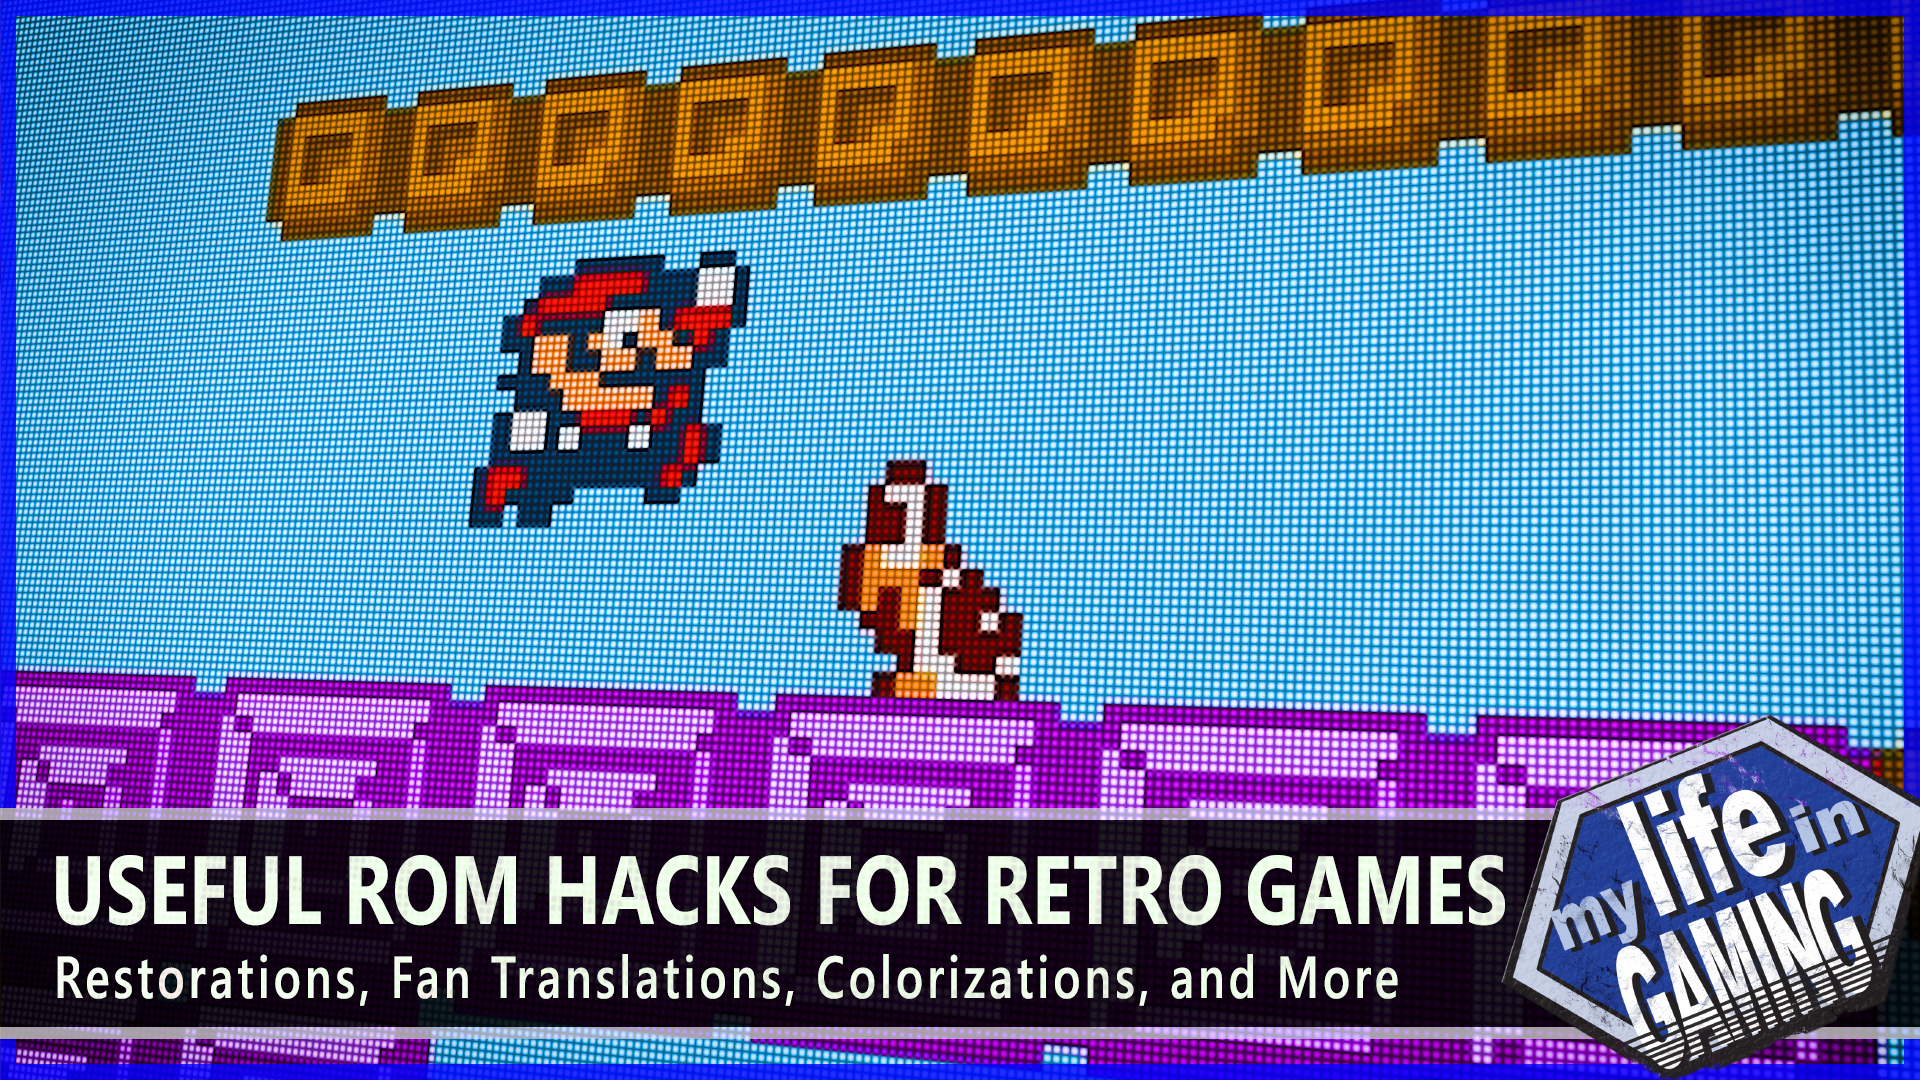 Useful ROM Hacks for Retro Games from My Life in Gaming